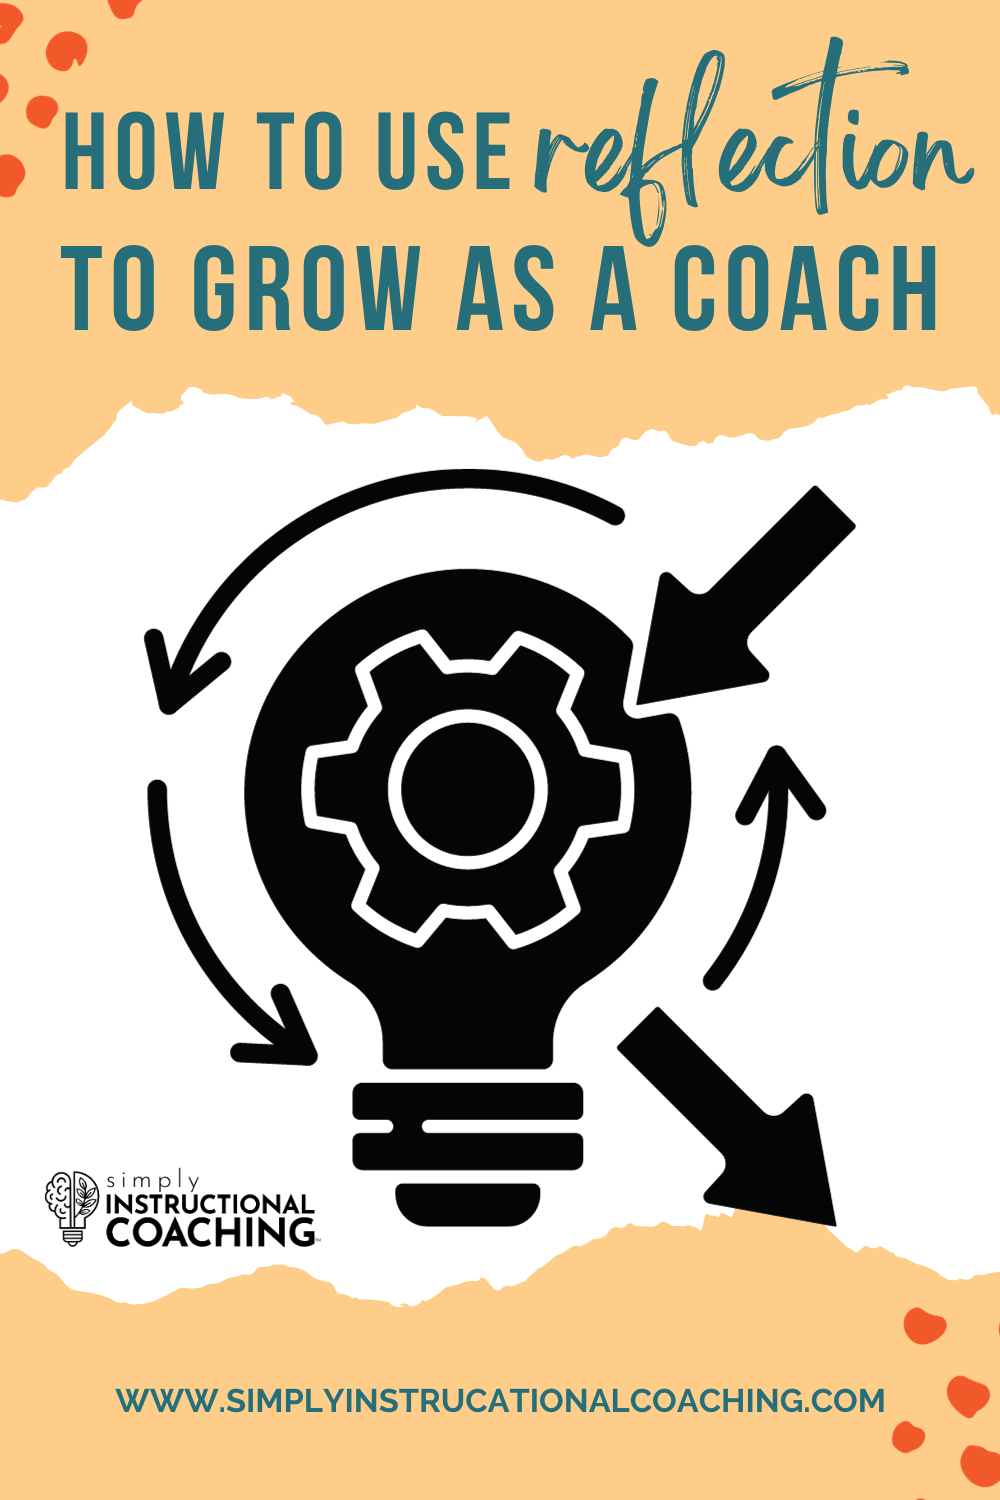 How to use reflection to grow as an instructional coach